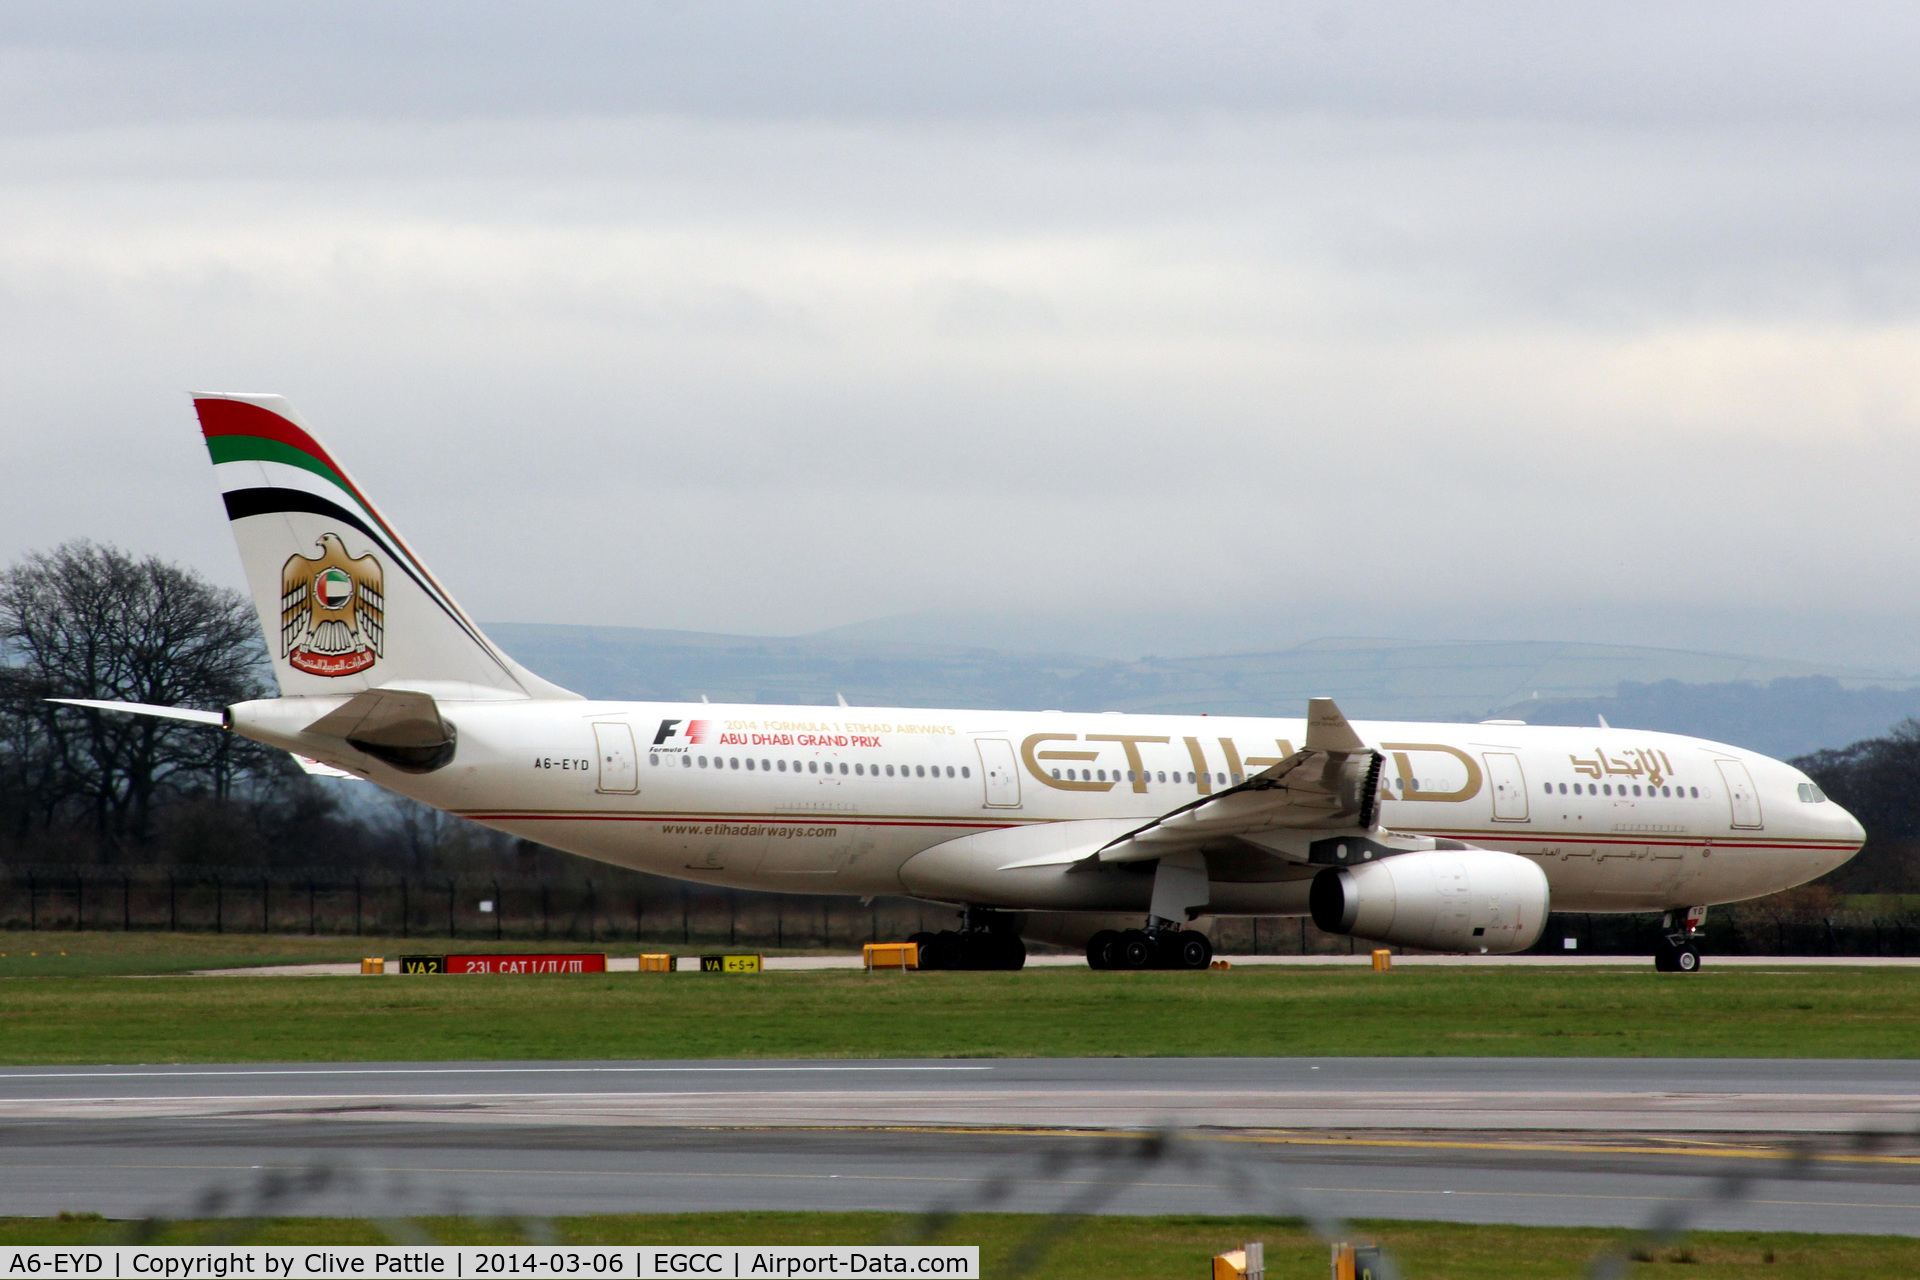 A6-EYD, 2005 Airbus A330-243 C/N 658, Waiting for take-off from Manchester EGCC